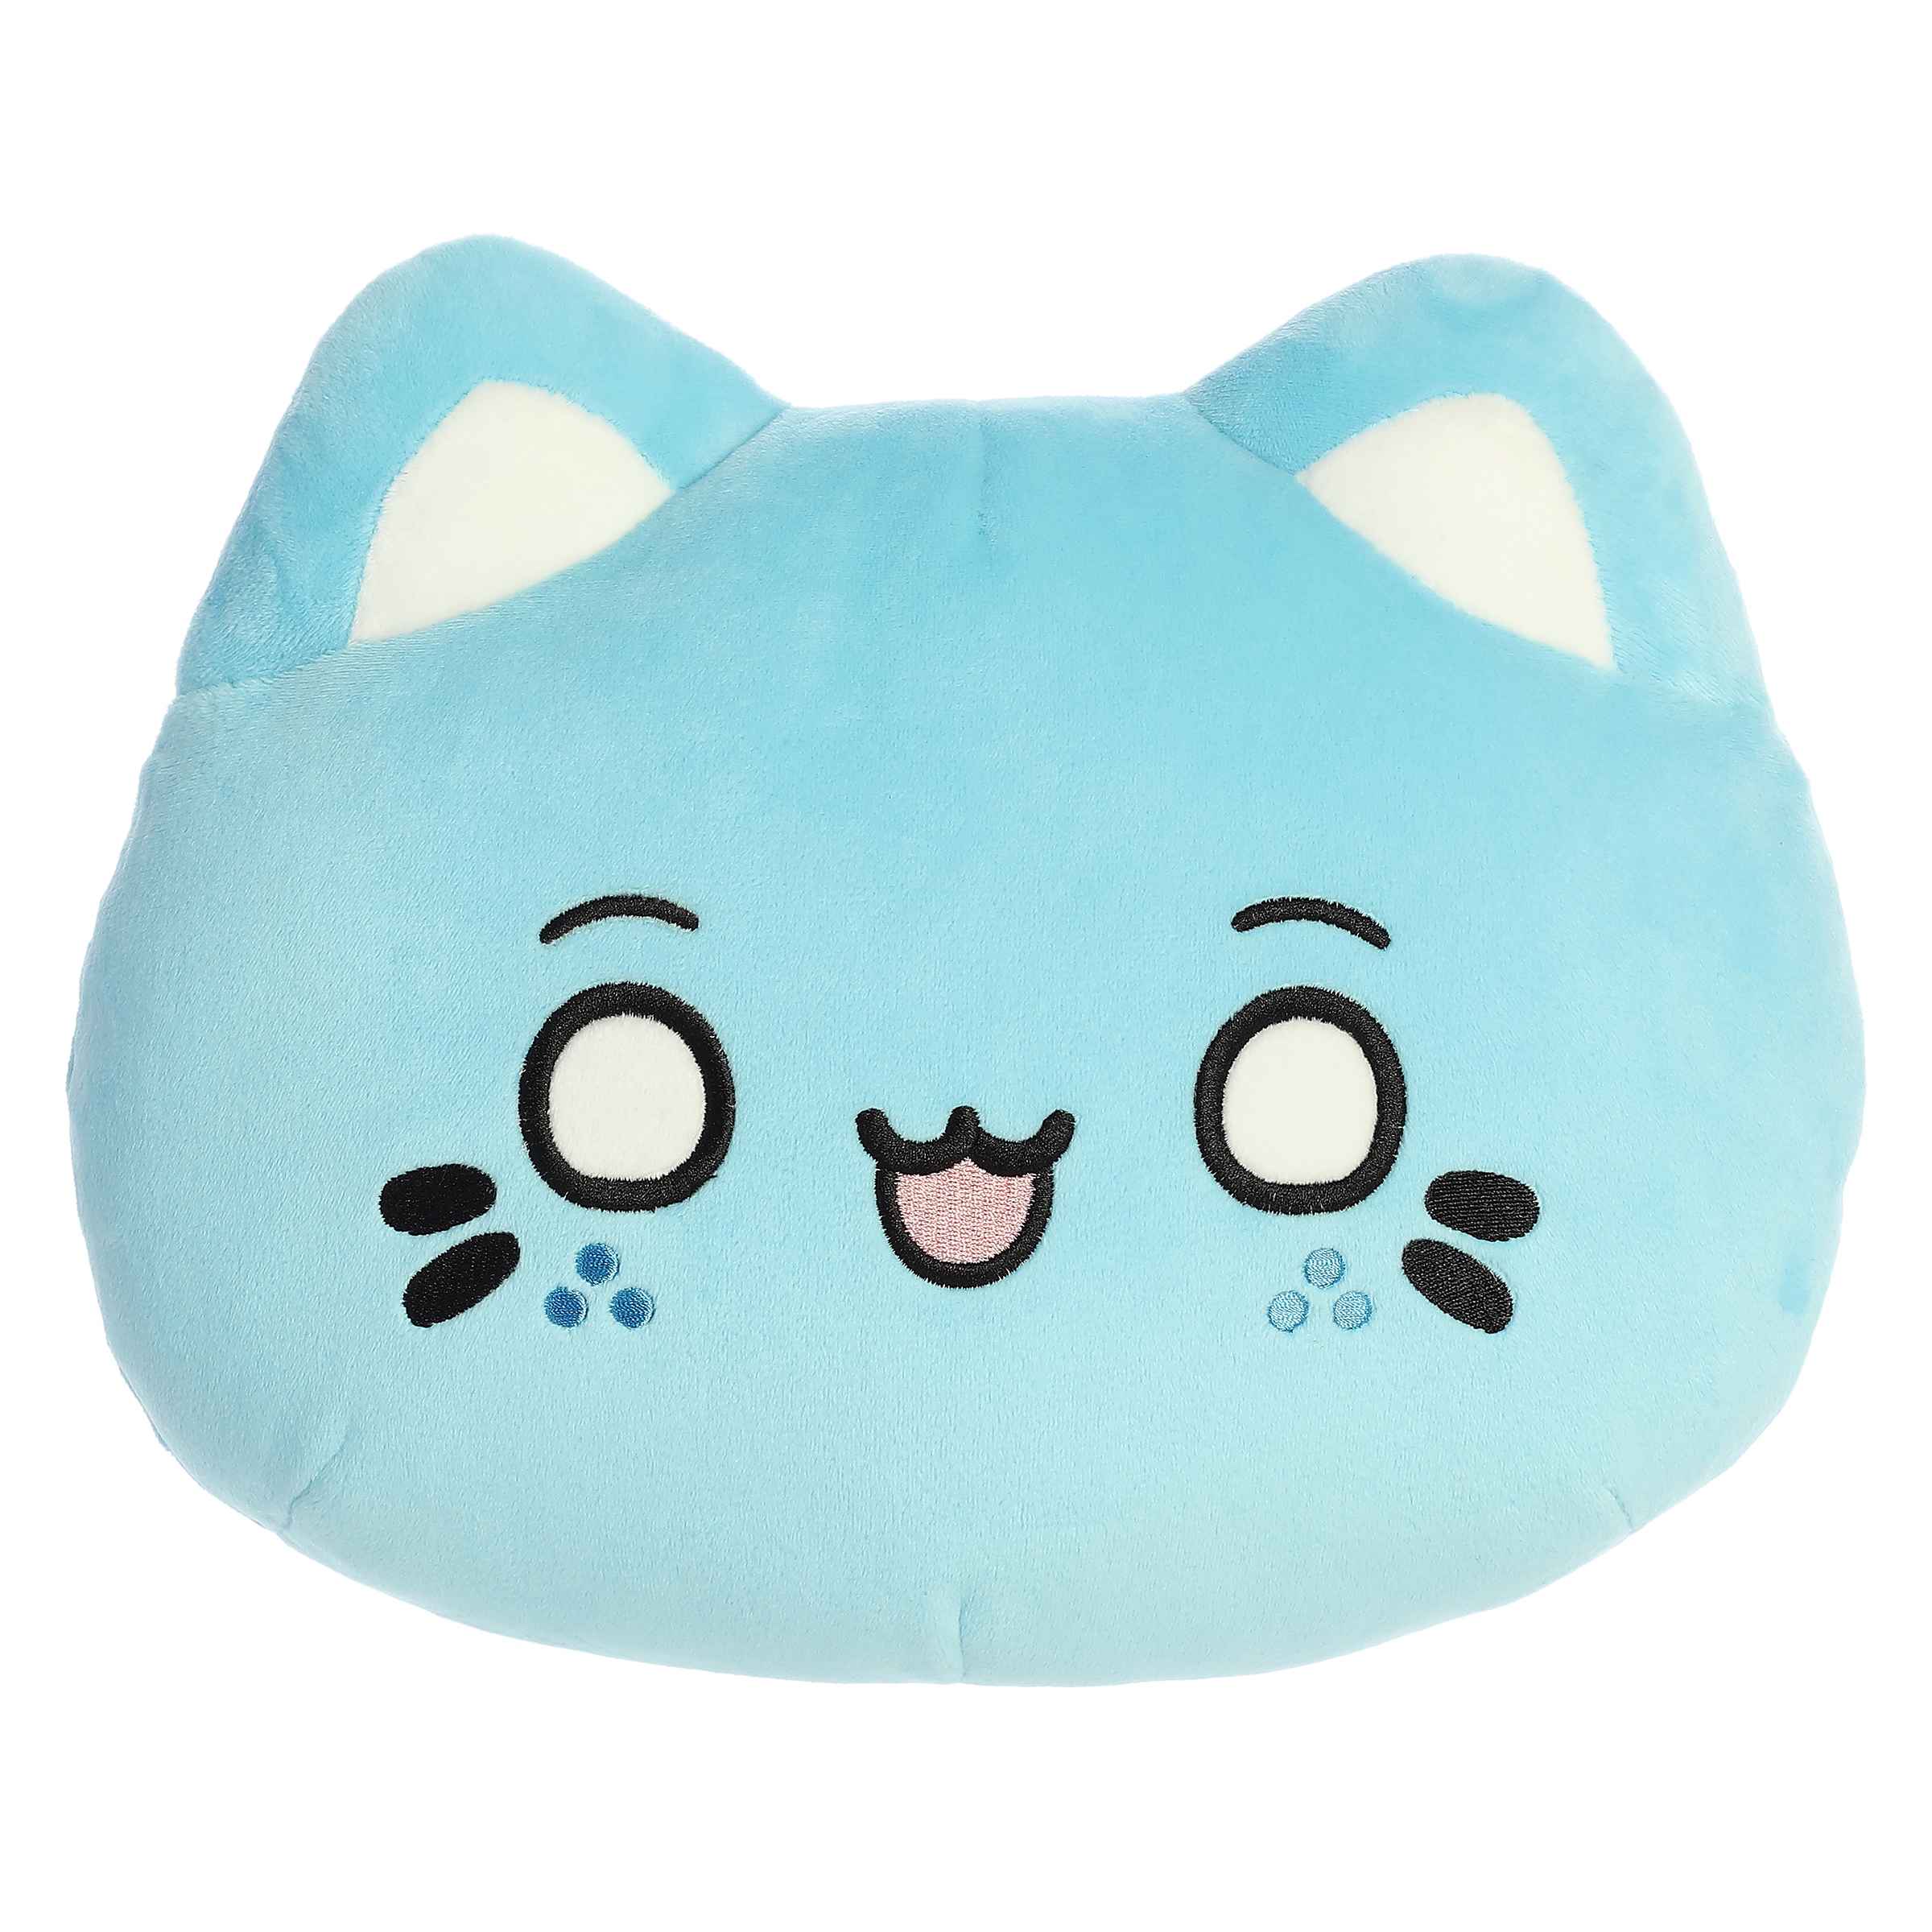 Marble Soda Meowchi Face Plush from Tasty Peach, sky-blue hue, sweet winking expression, ideal for lounging and decoration